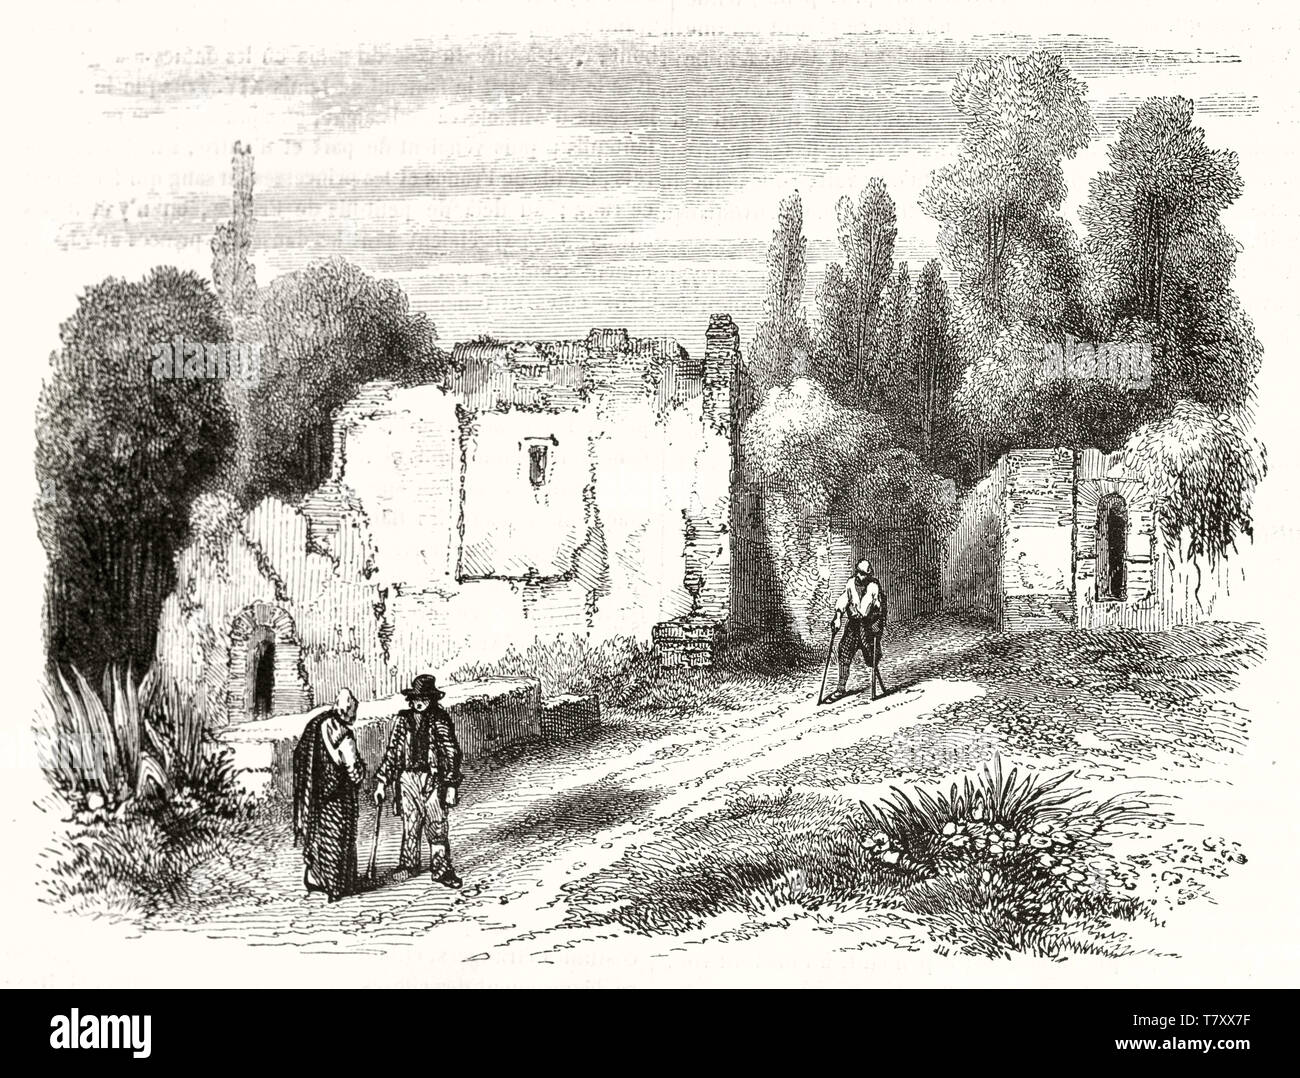 Ancient ruins in Marly country surroundings France. Etching style grayscale illustration with textures made by hatching. By unidentified author publ. on Magasin Pittoresque Paris 1848 Stock Photo